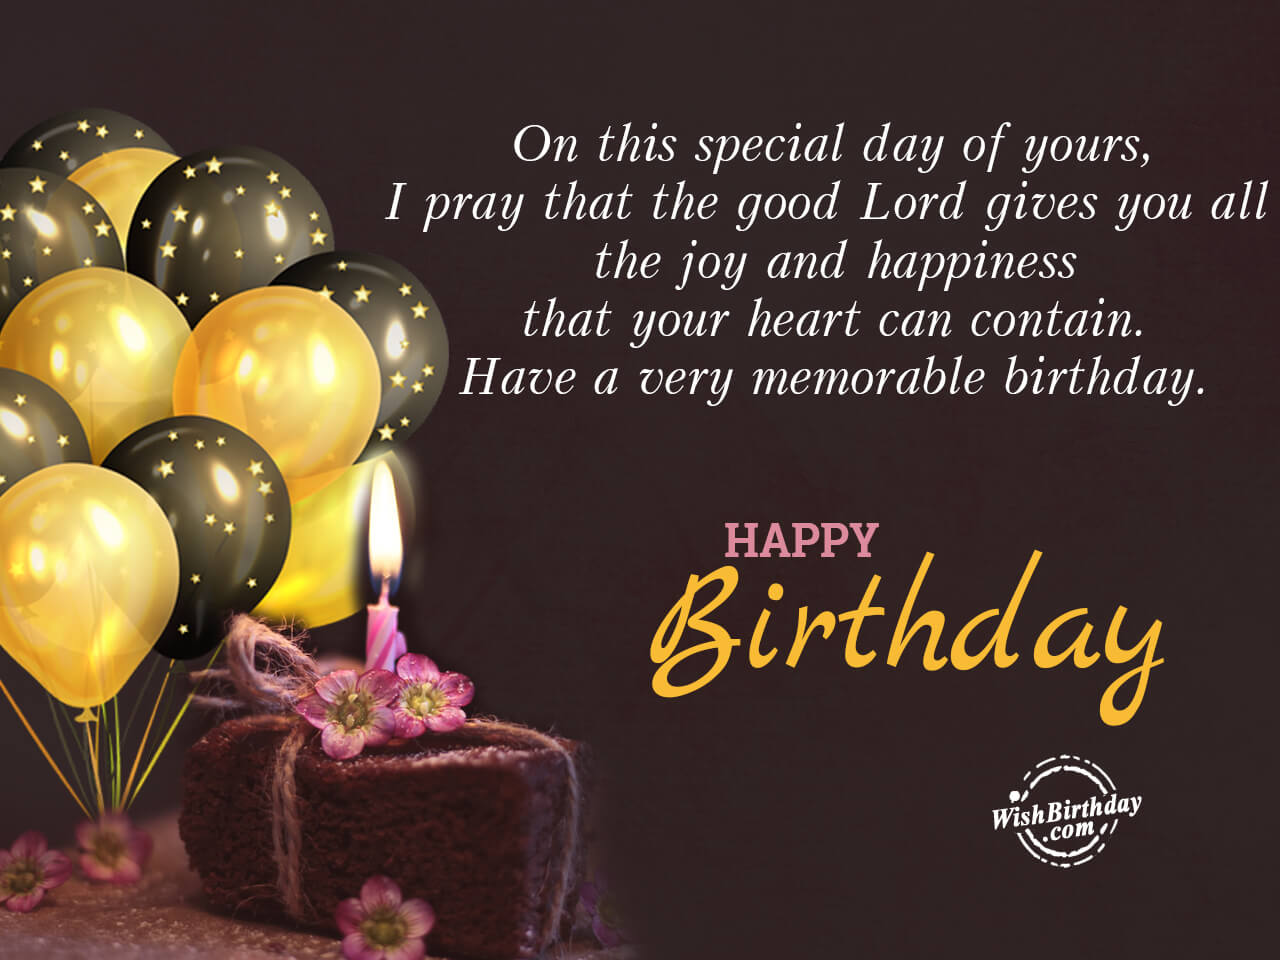 birthday-wishes-birthday-images-pictures